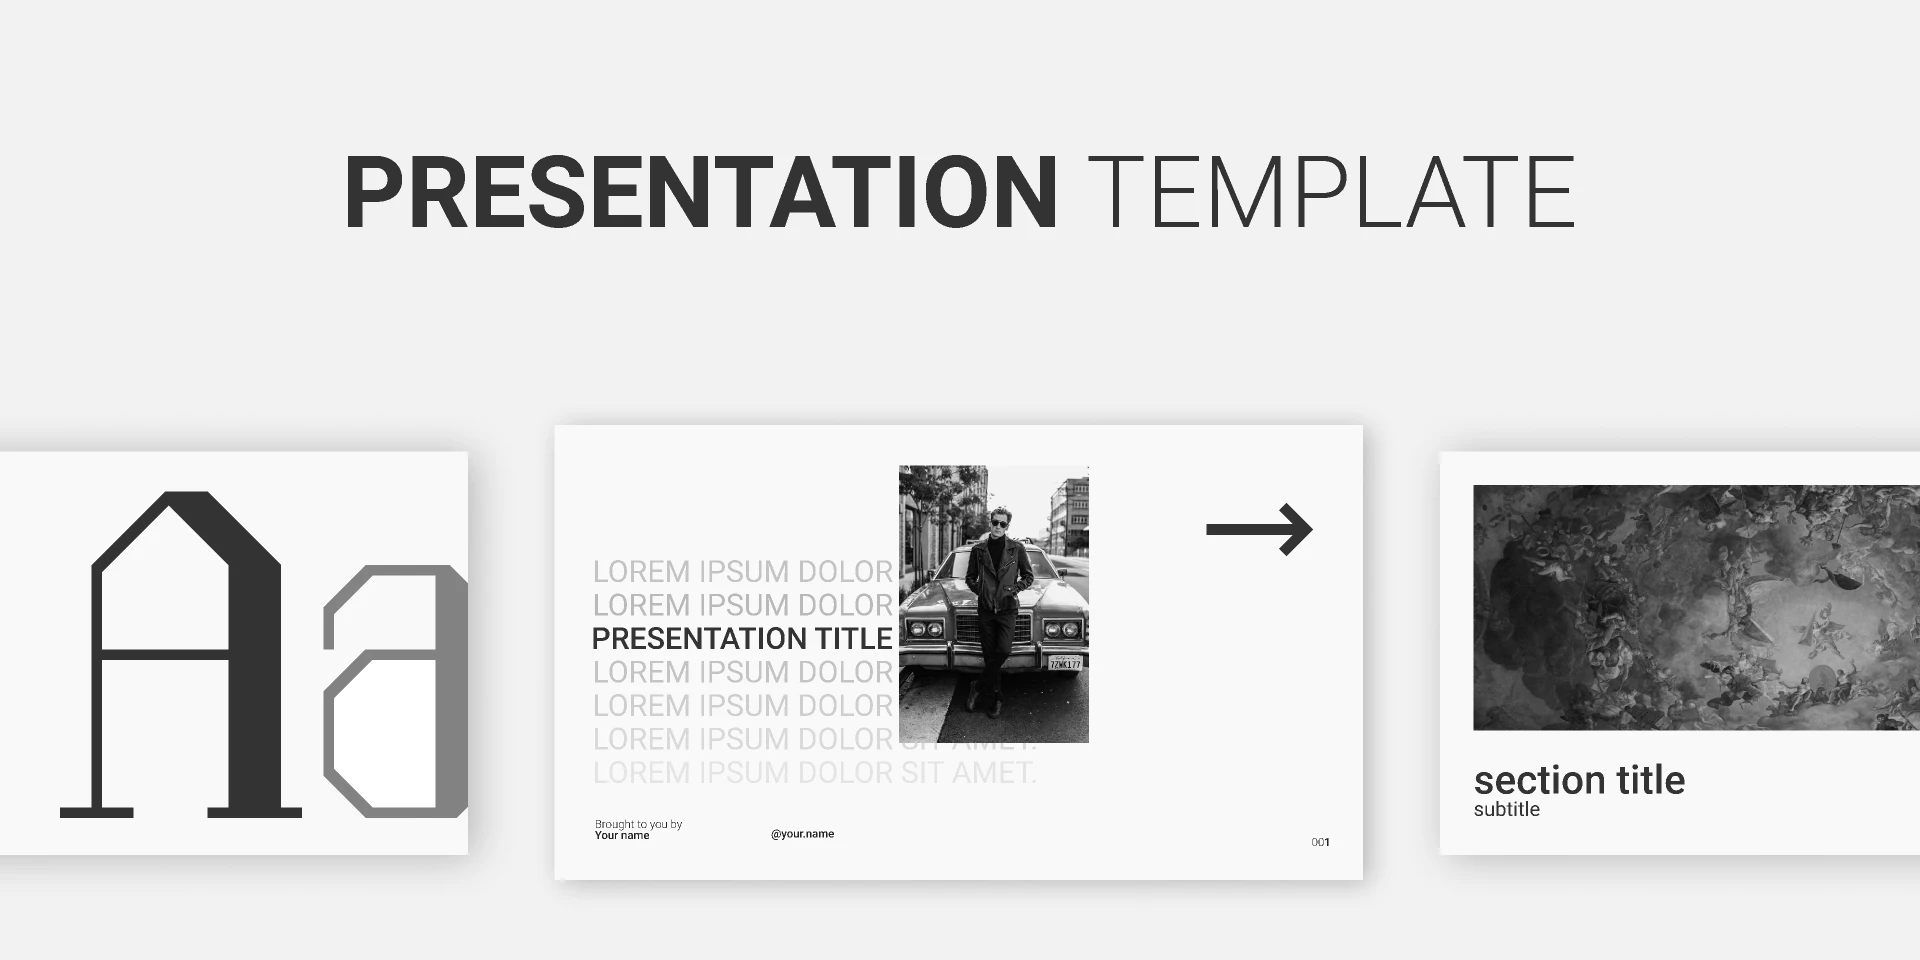 Presentation/Slides Template for Figma and Adobe XD